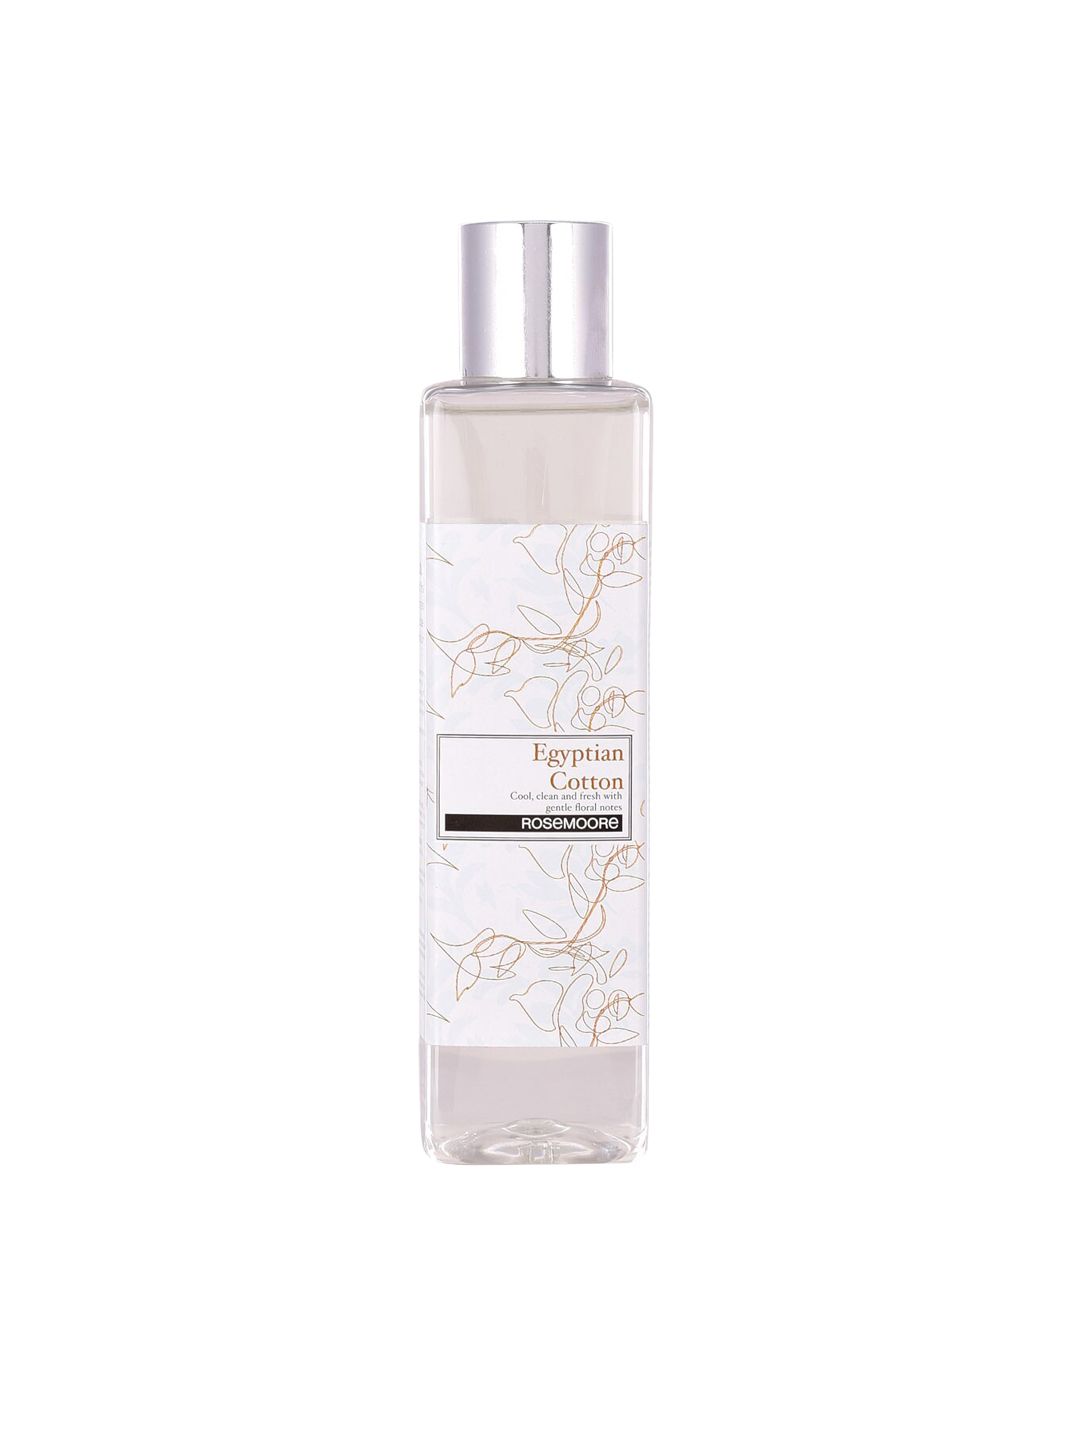 ROSEMOORe Transparent Scented Reed Diffuser Refill Egyptian Cotton - 200 ml Price in India